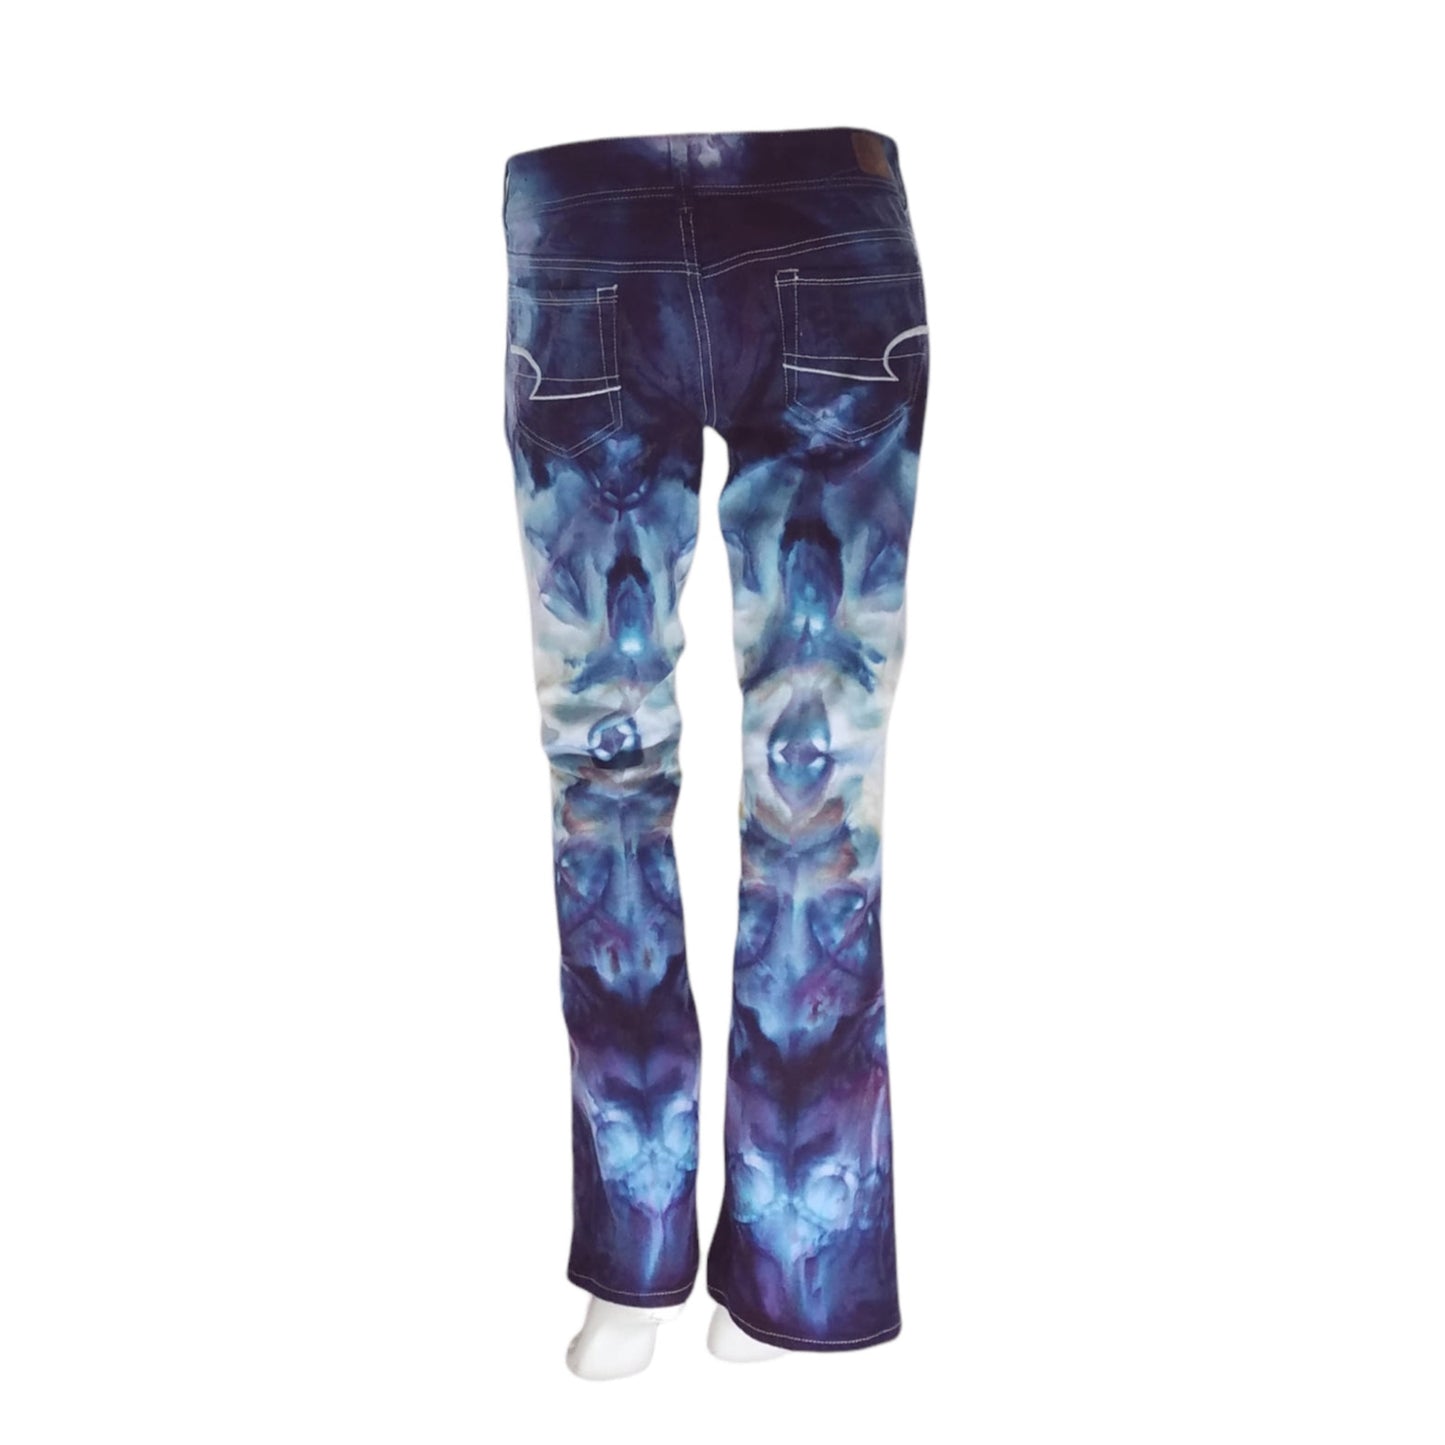 Tie Dyed Jeans Blues for Purples Size 10 Bootcut